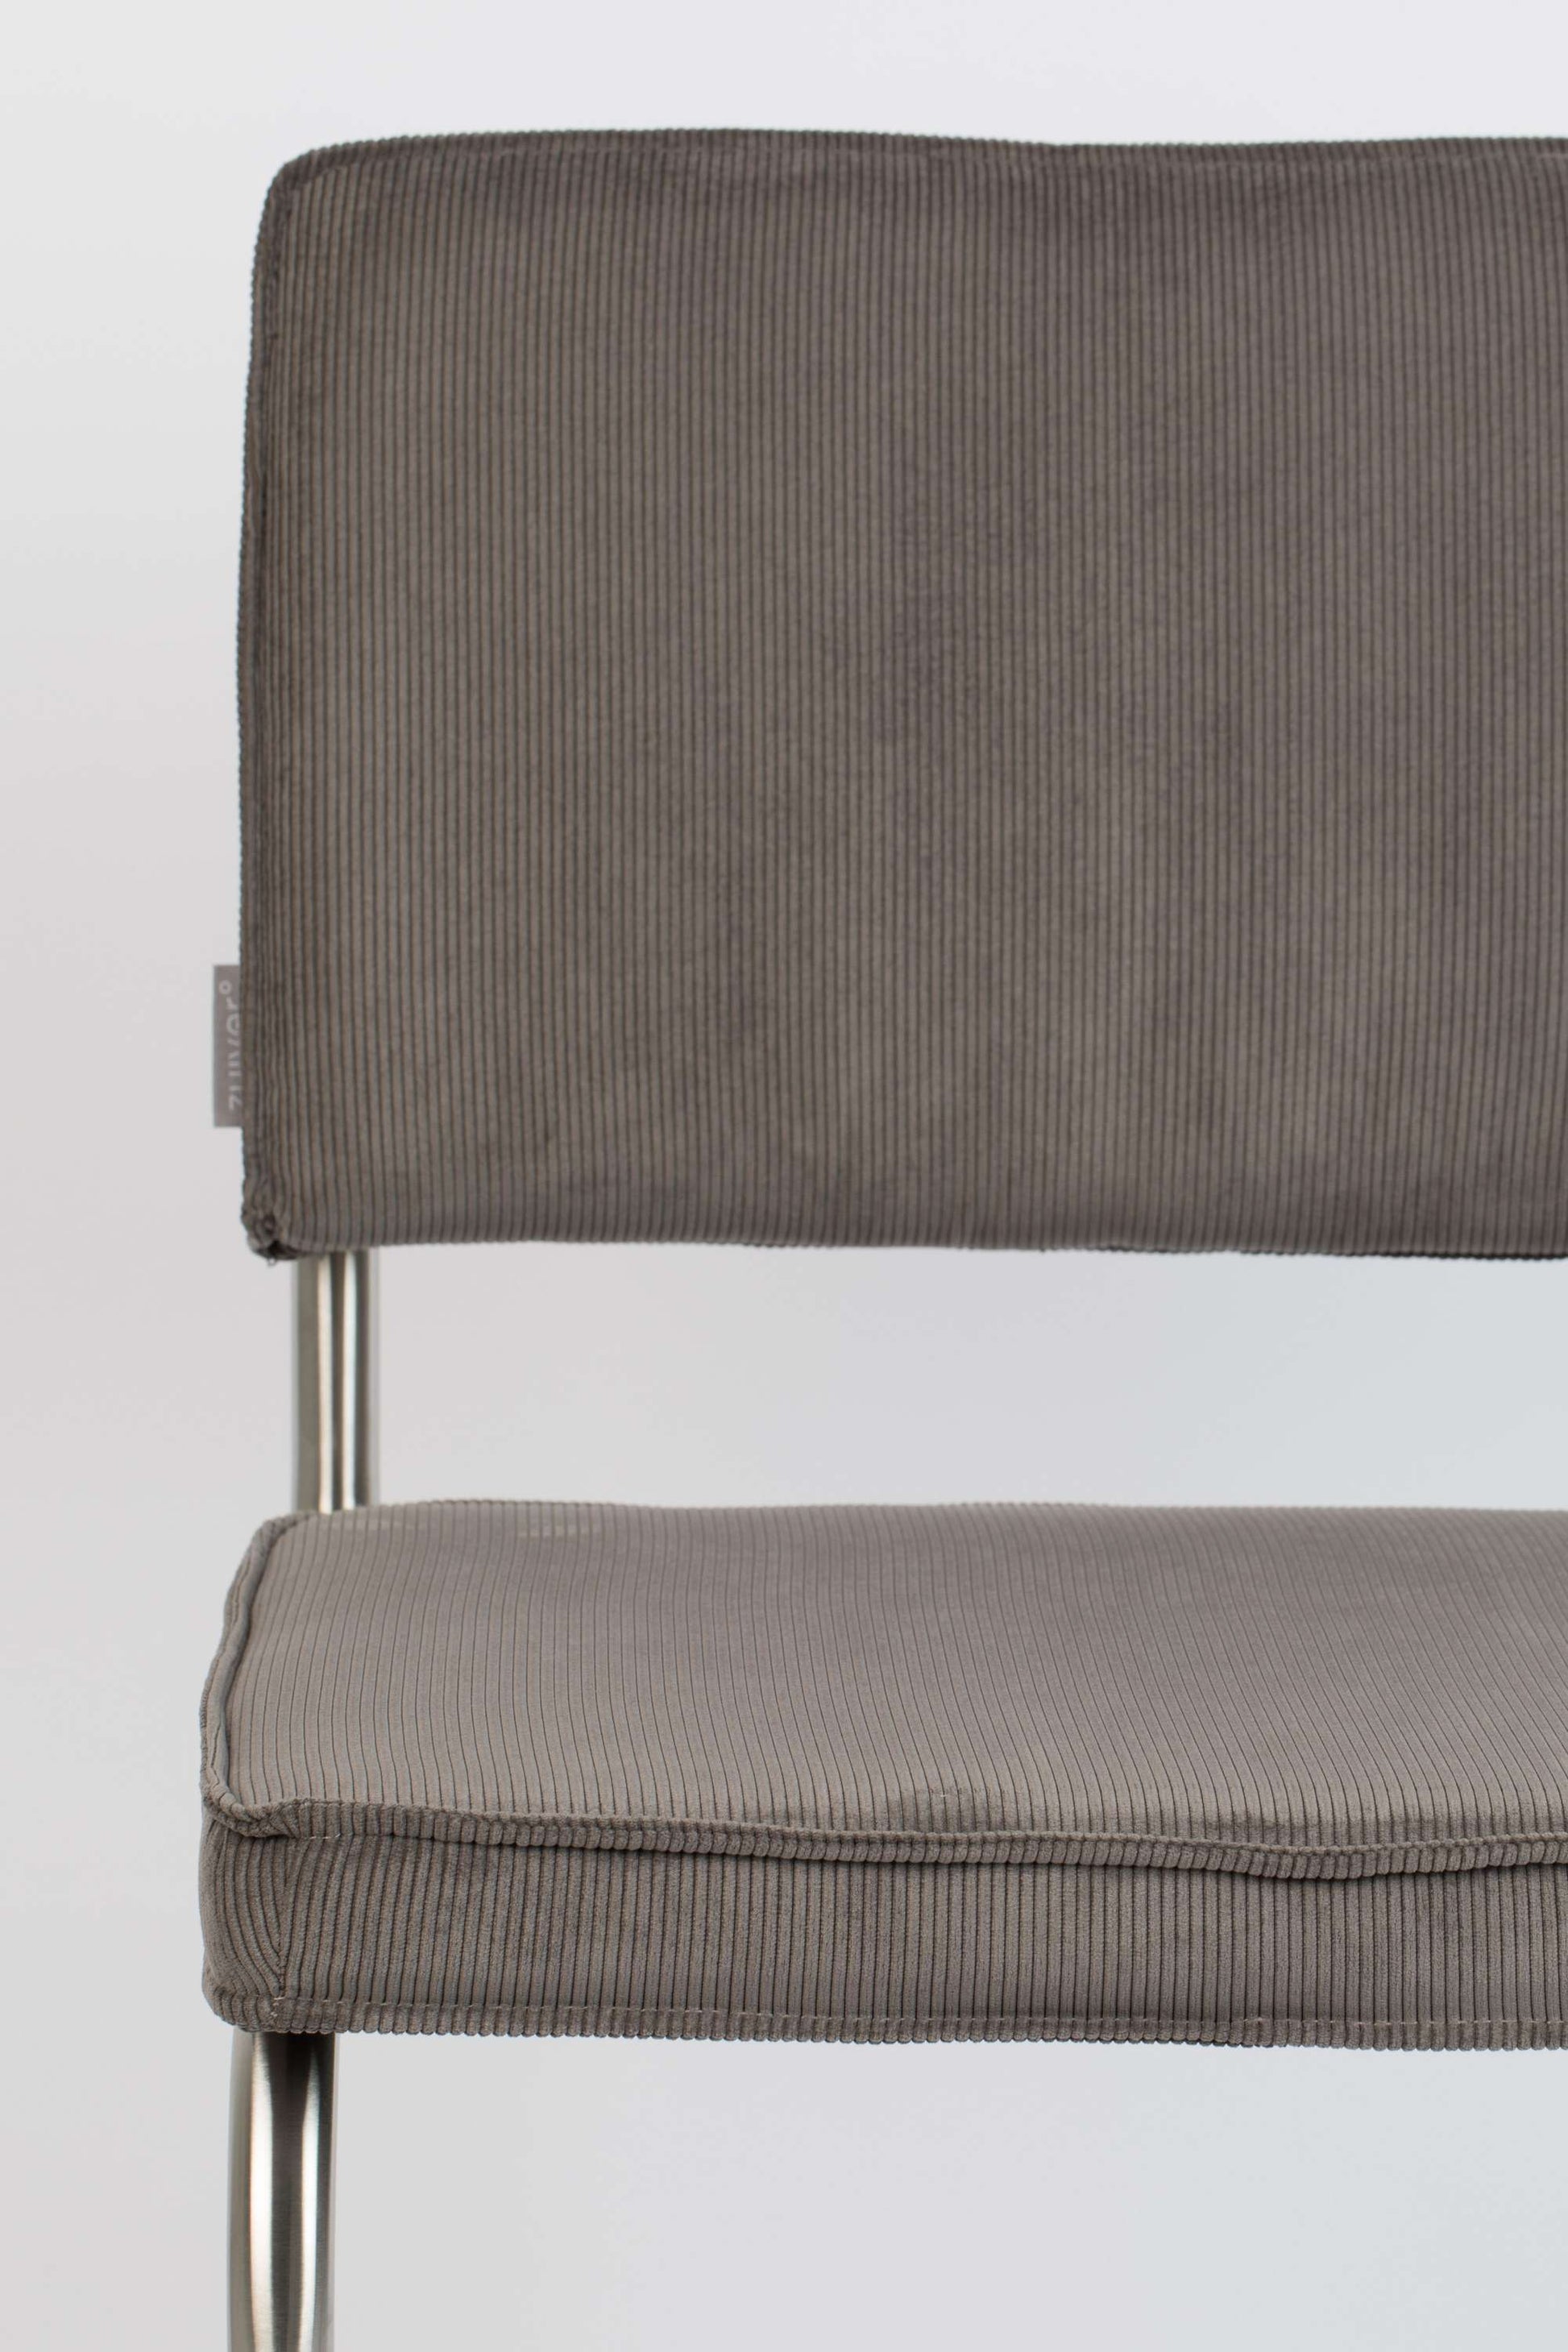 Zuiver | CHAIR RIDGE BRUSHED RIB GREY 6A Default Title